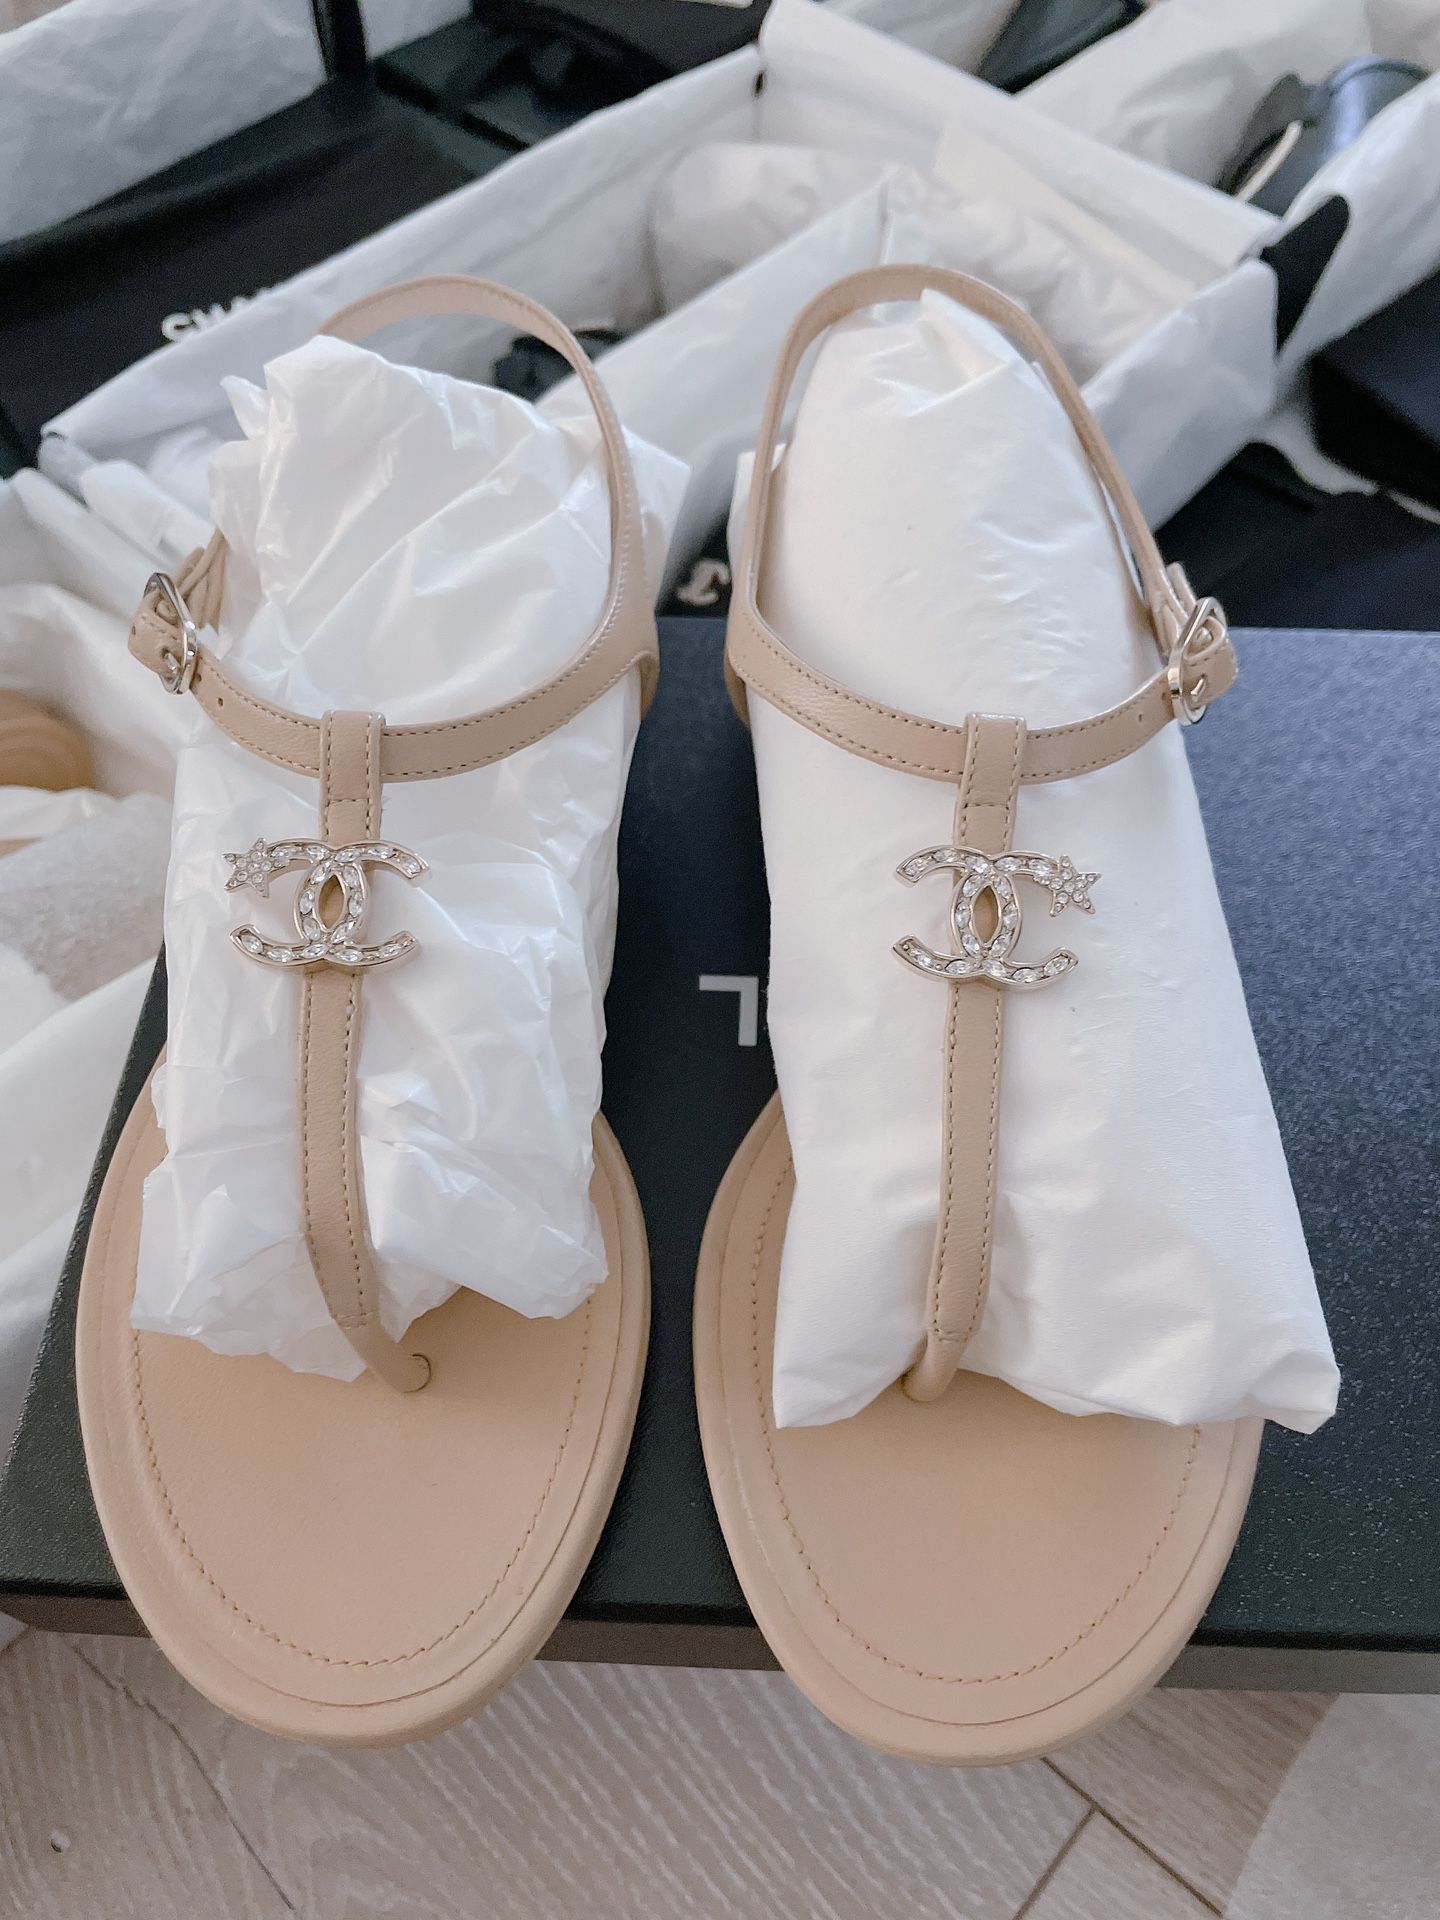 New- Chanel Flat Sandals (Size 35.5 ,36.5) for Sale in Concord, CA - OfferUp